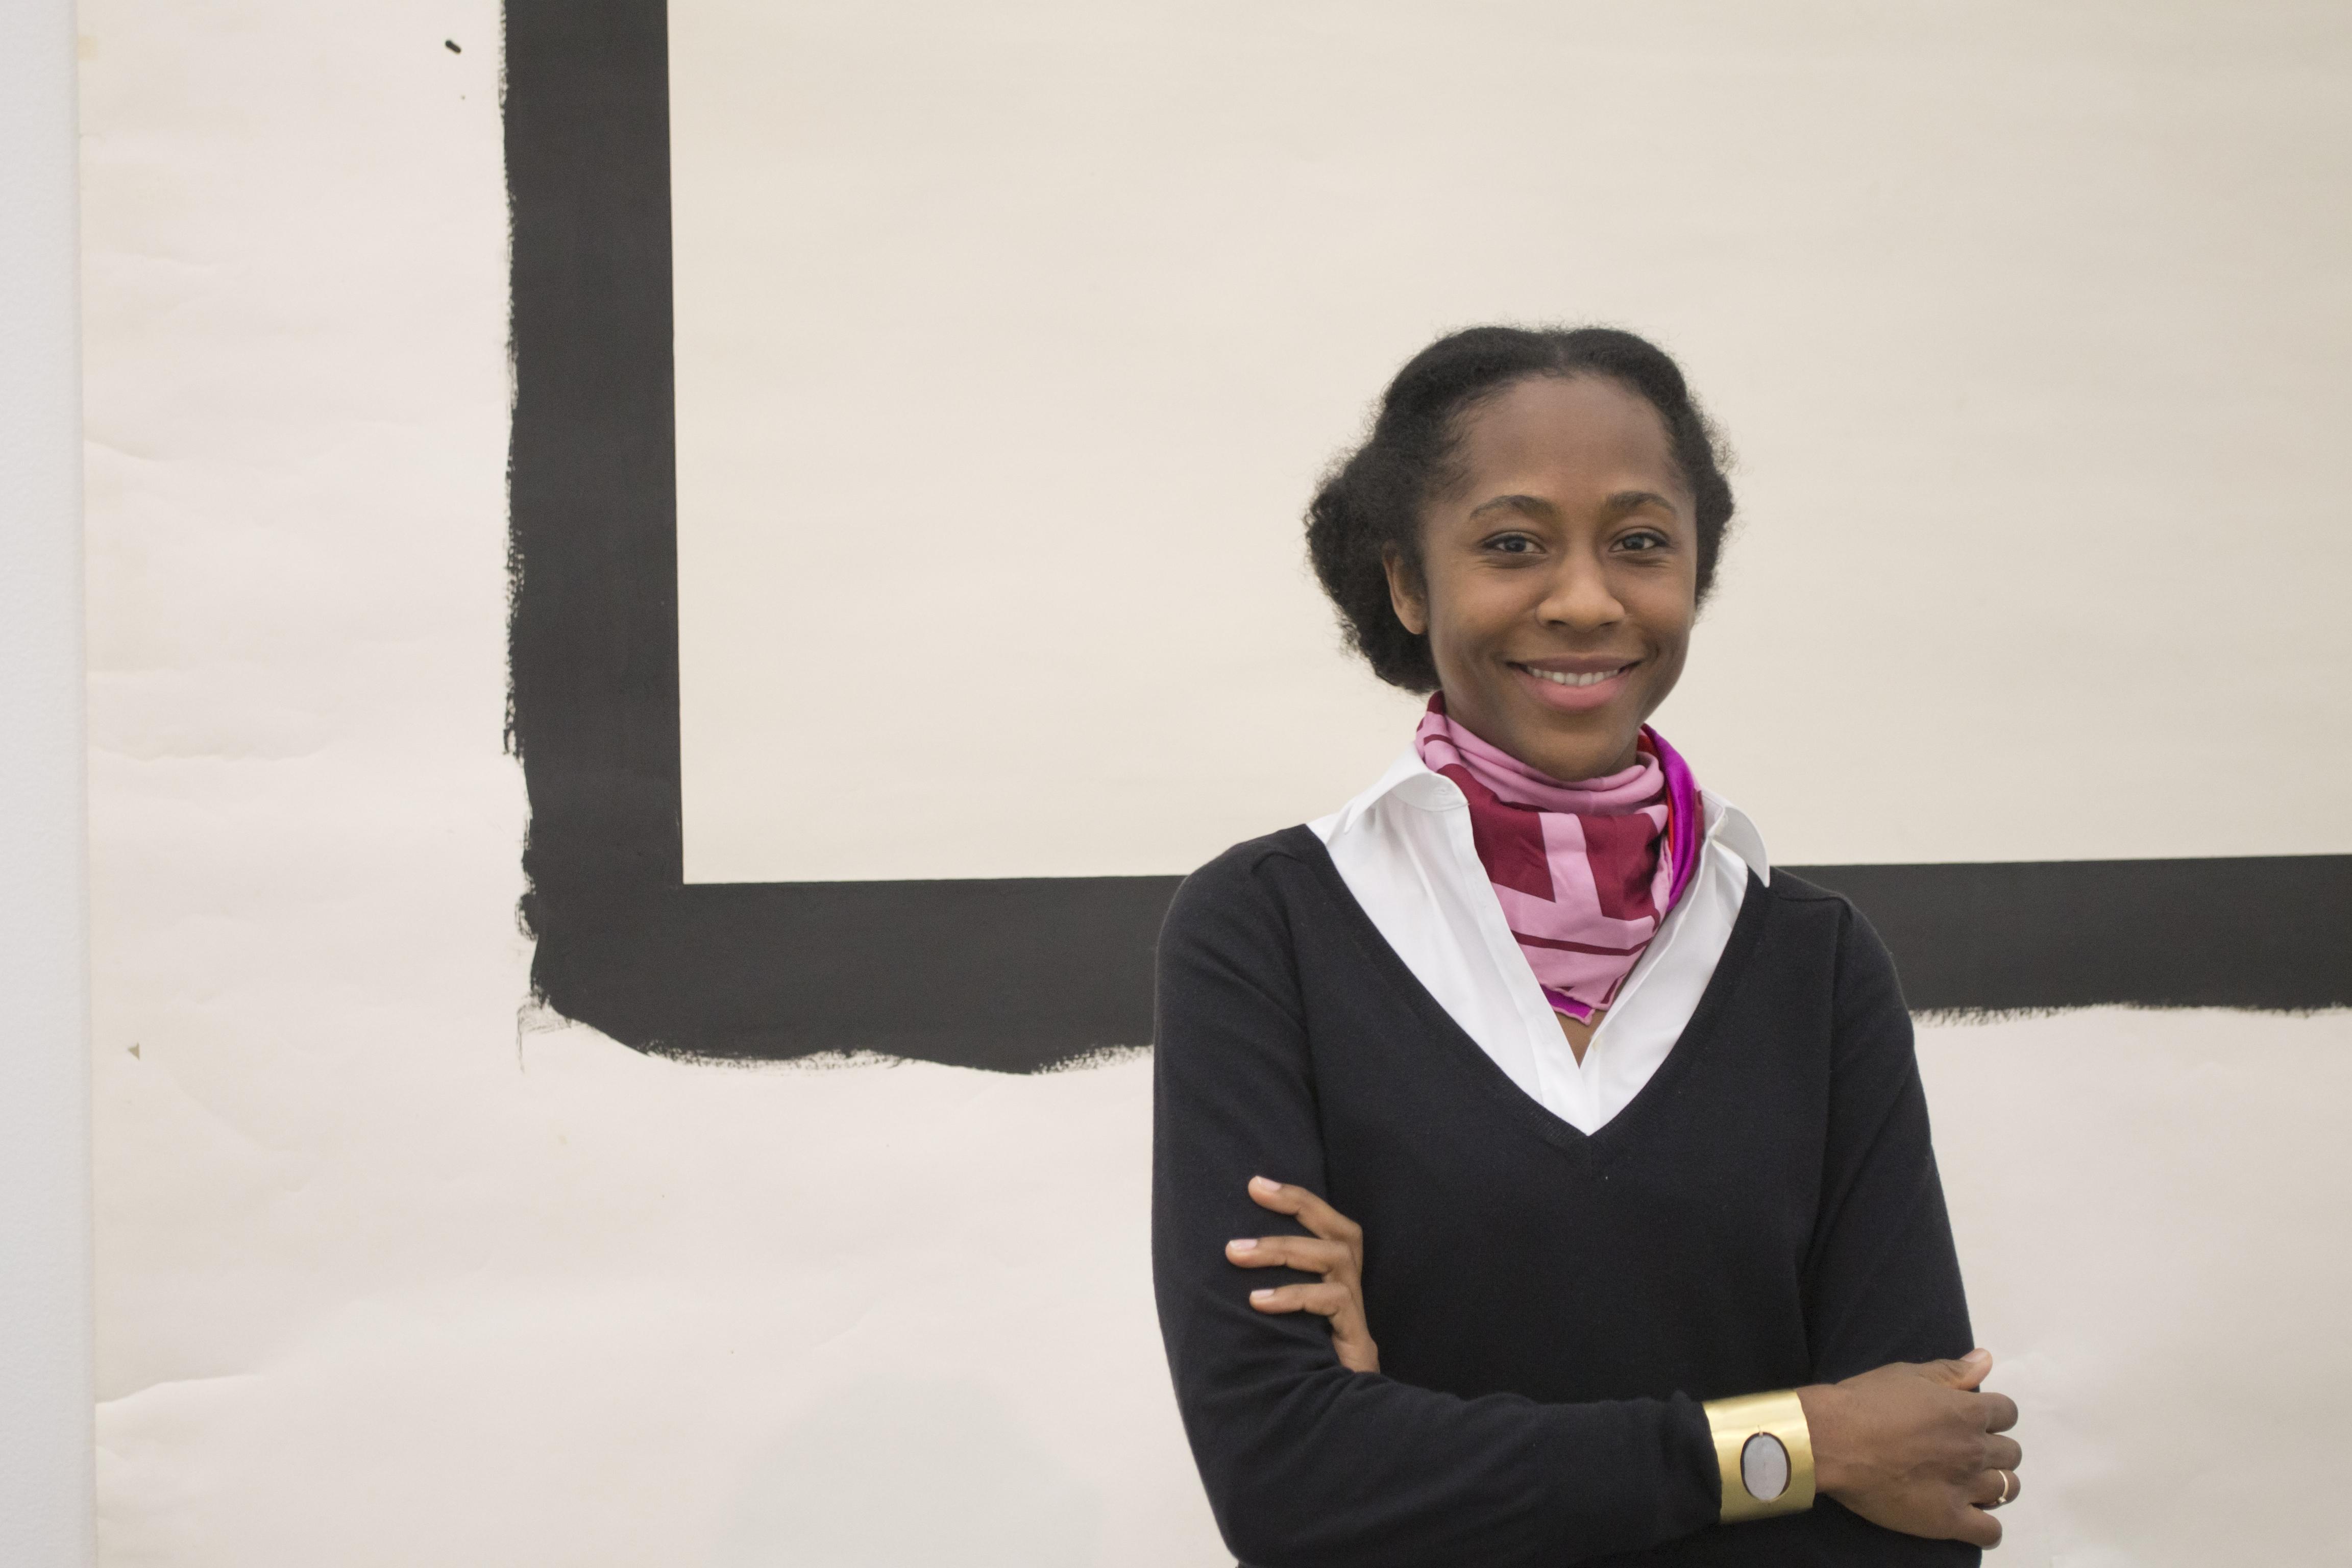 A woman in a black sweater and pink scarf smiles in front of back and white artwork.